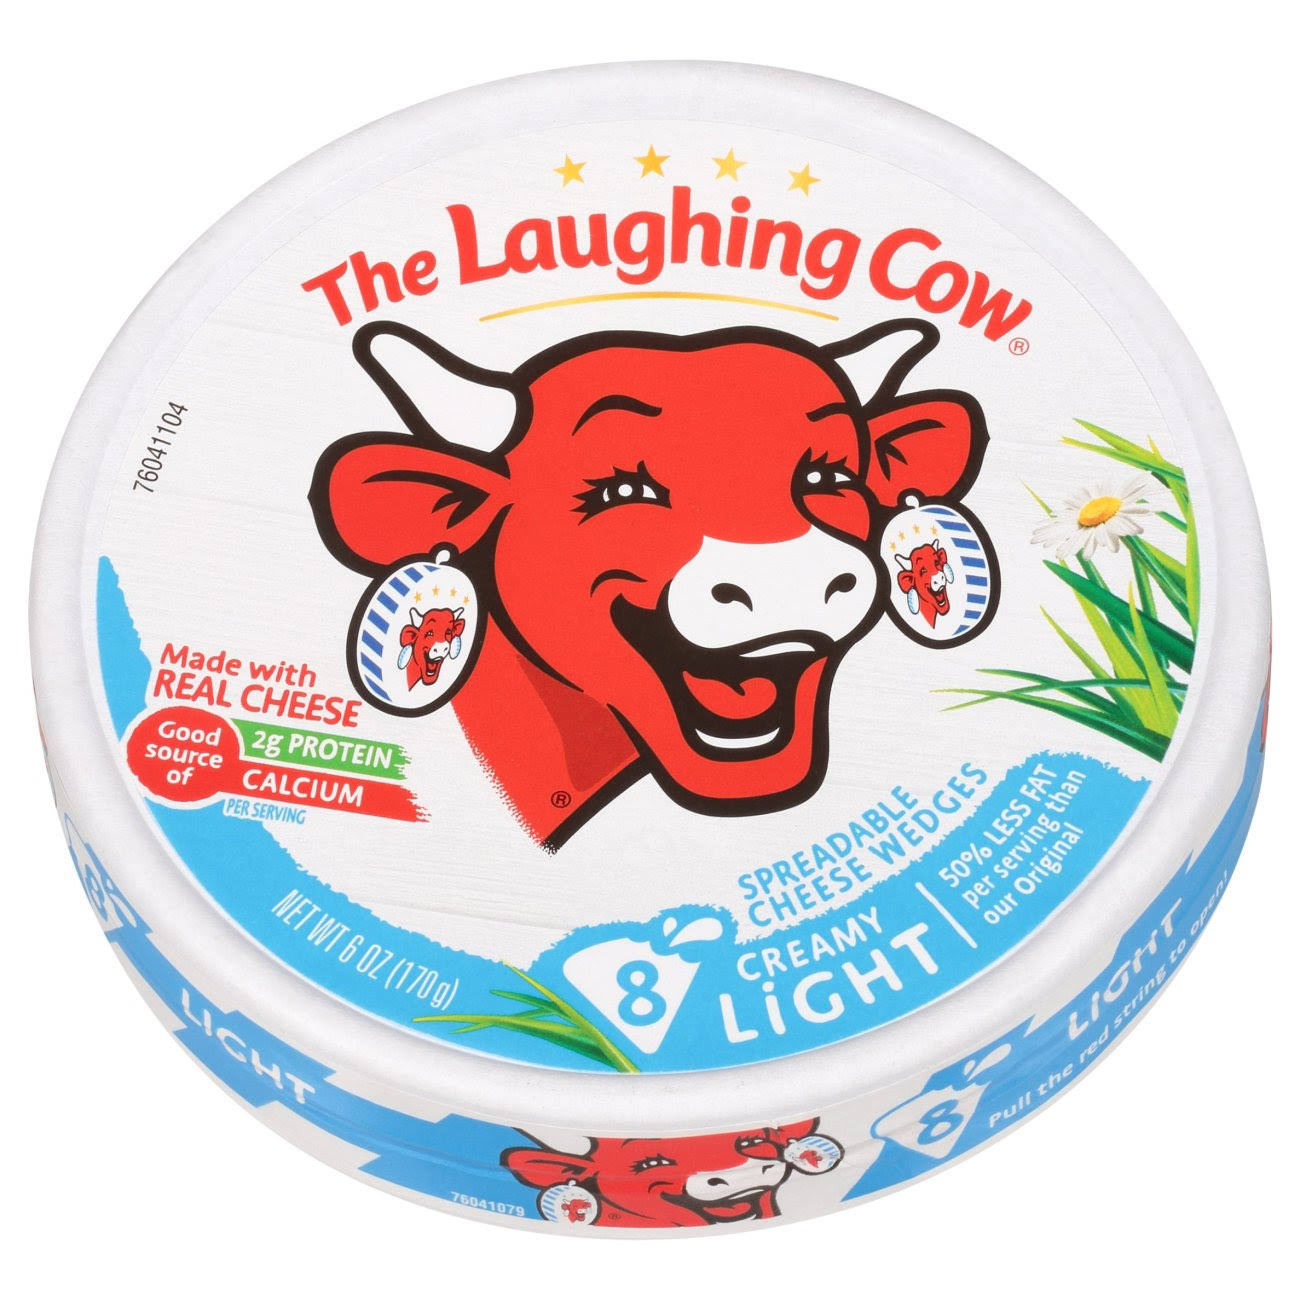 The Laughing Cow Light Spreadable Creamy Cheese Wedges